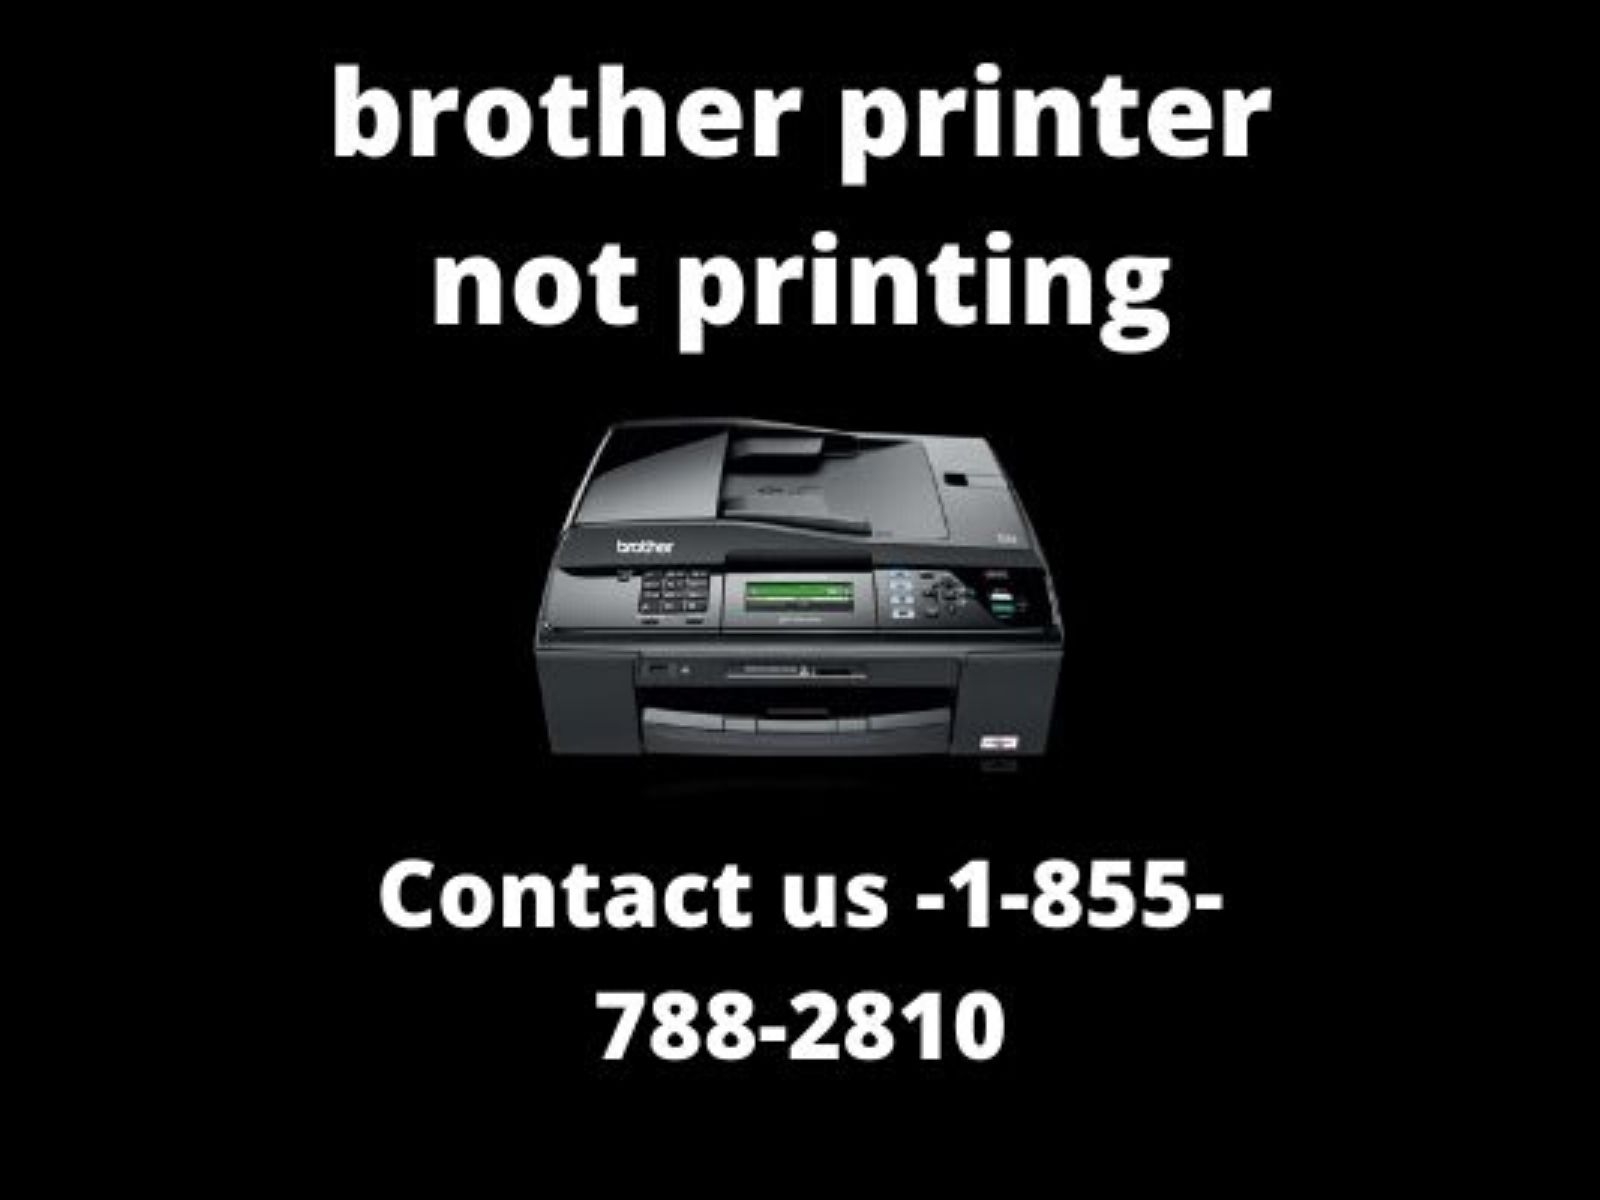 why my brother l2740 printer wont print after installing new toner